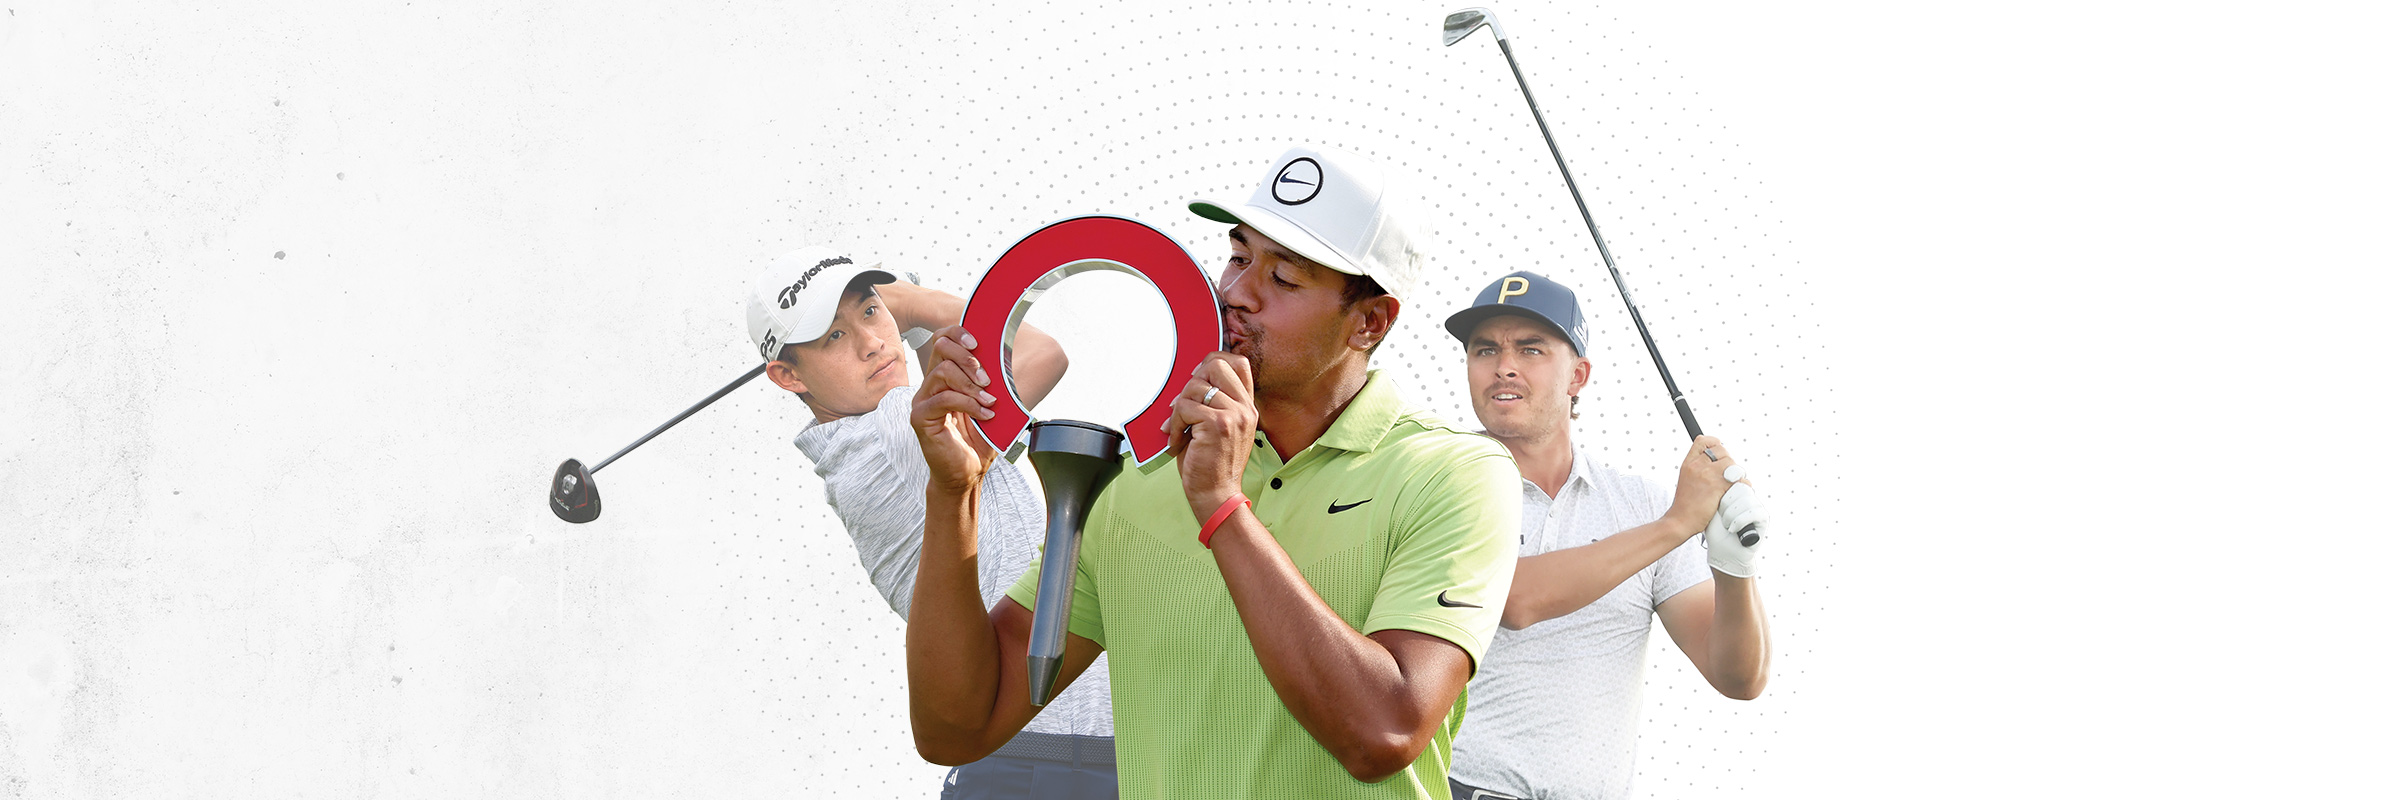 Rocket Mortgage Classic Tickets On Sale Now; Early Player Commitments Include Two-Time Major Champion Collin Morikawa, Defending Champion Tony Finau and Five-Time PGA TOUR Winner Rickie Fowler